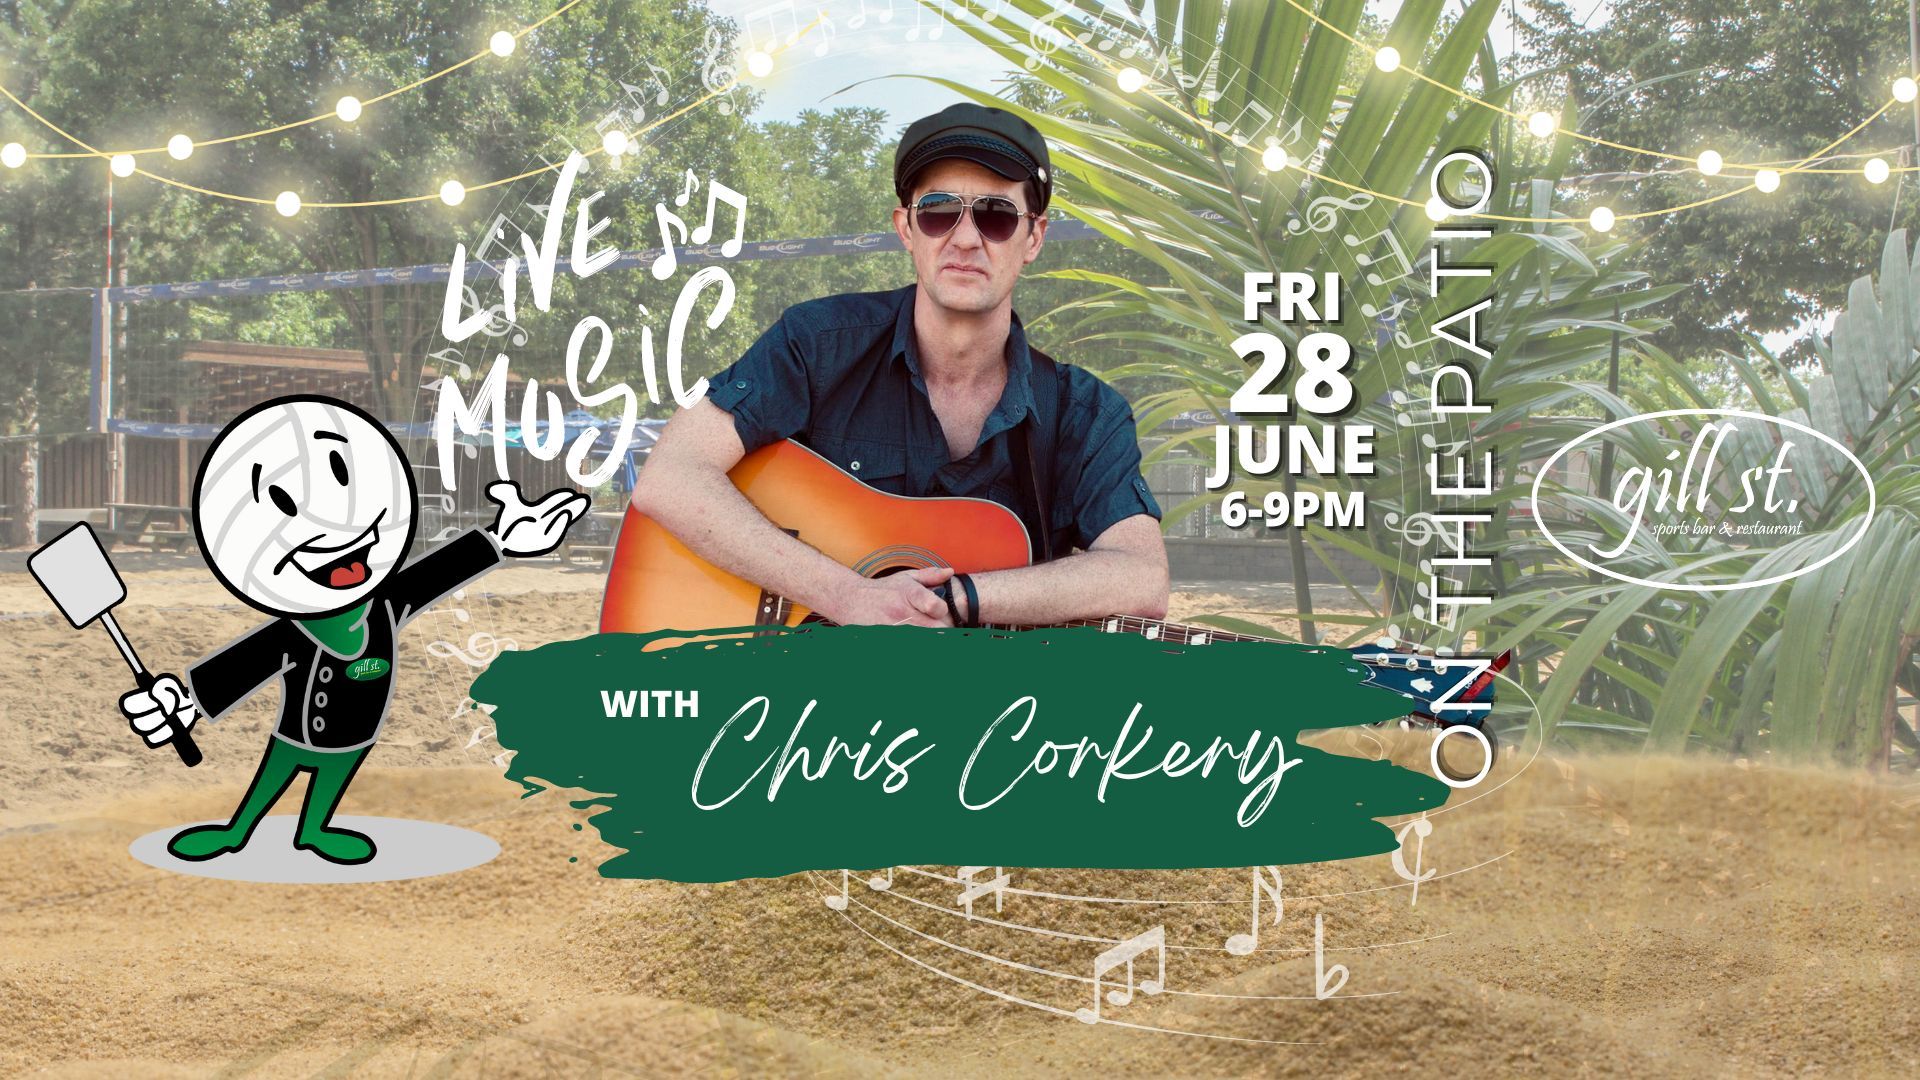 Live Music with Chris Corkery